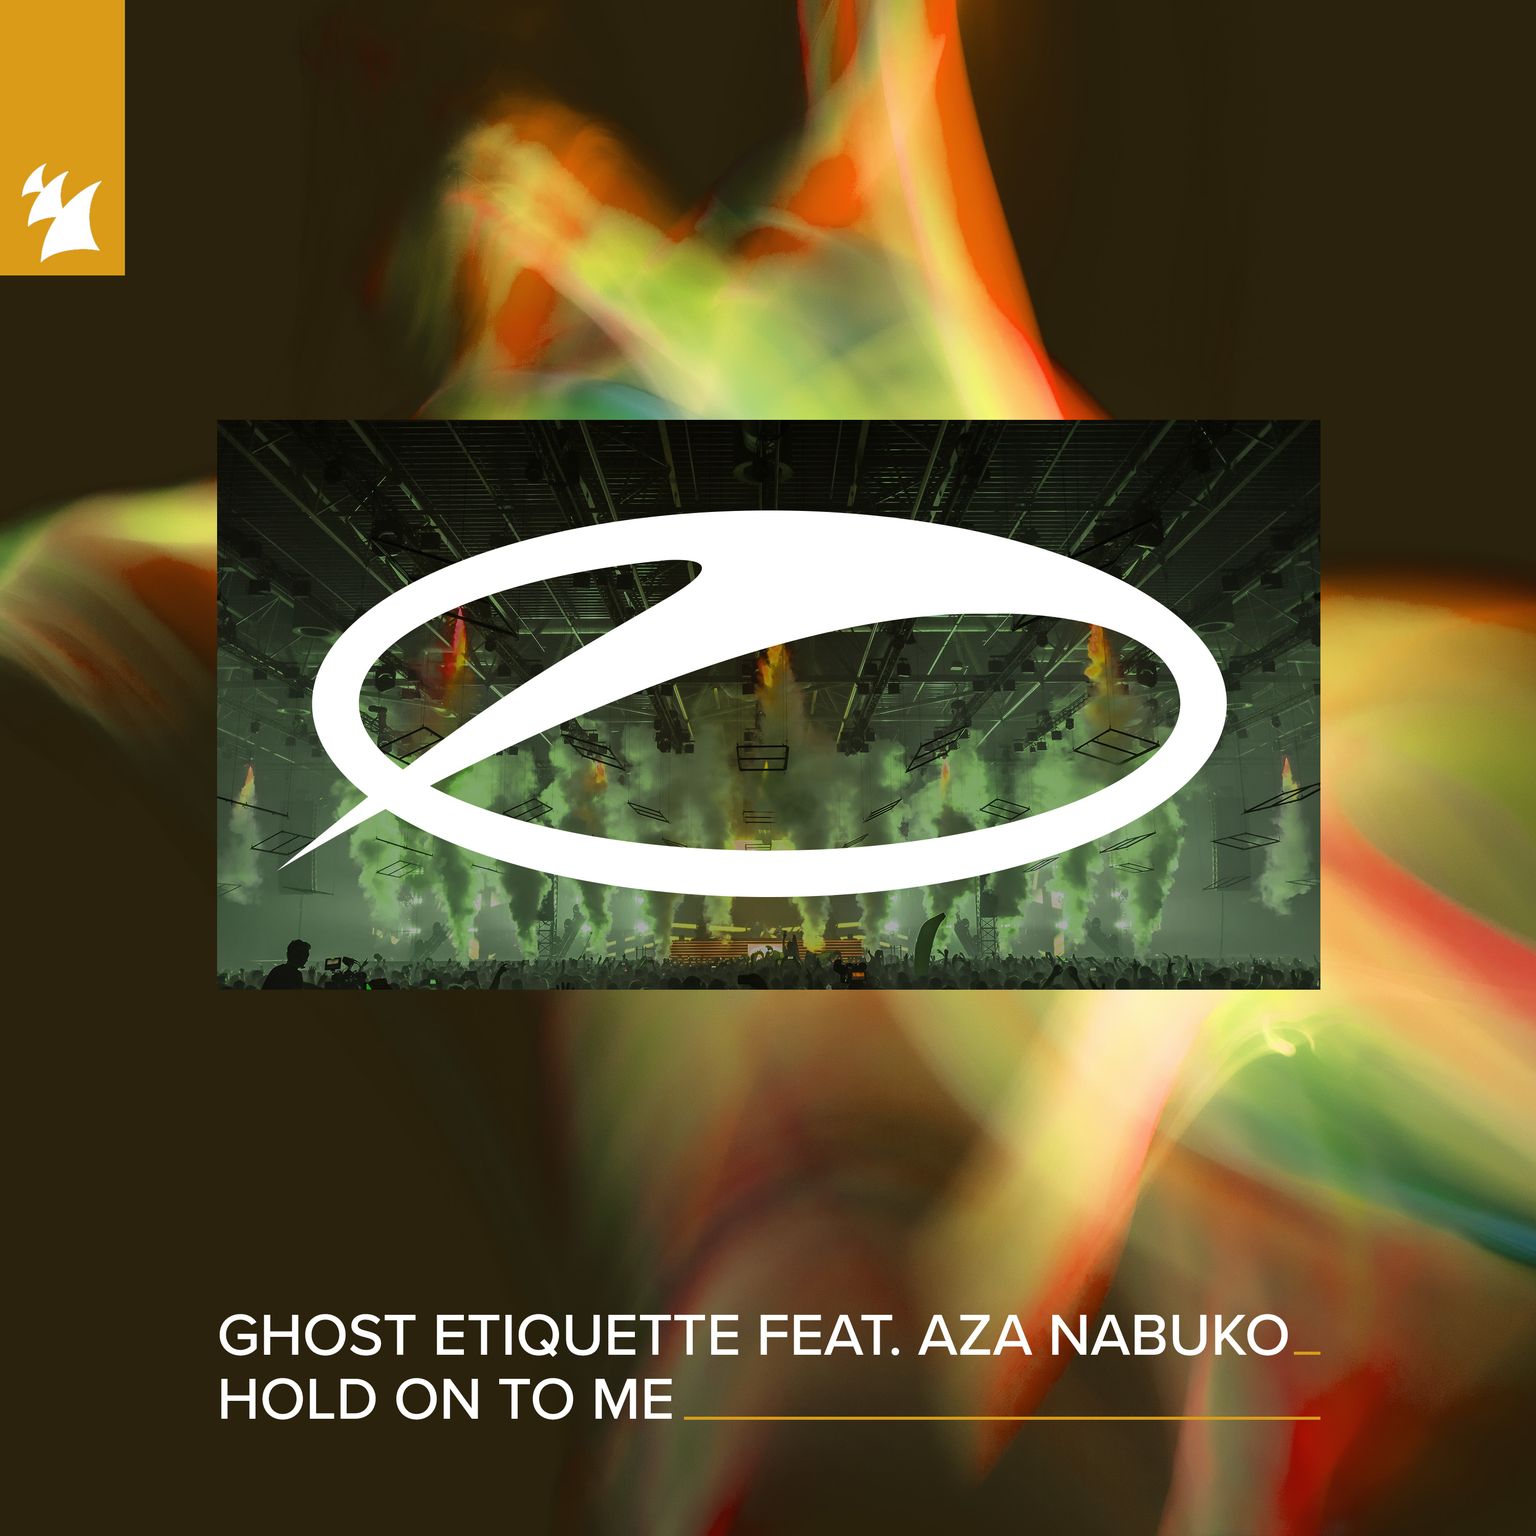 Ghost Etiquette feat. Aza Nabuko presents Hold On To Me on A State Of Trance